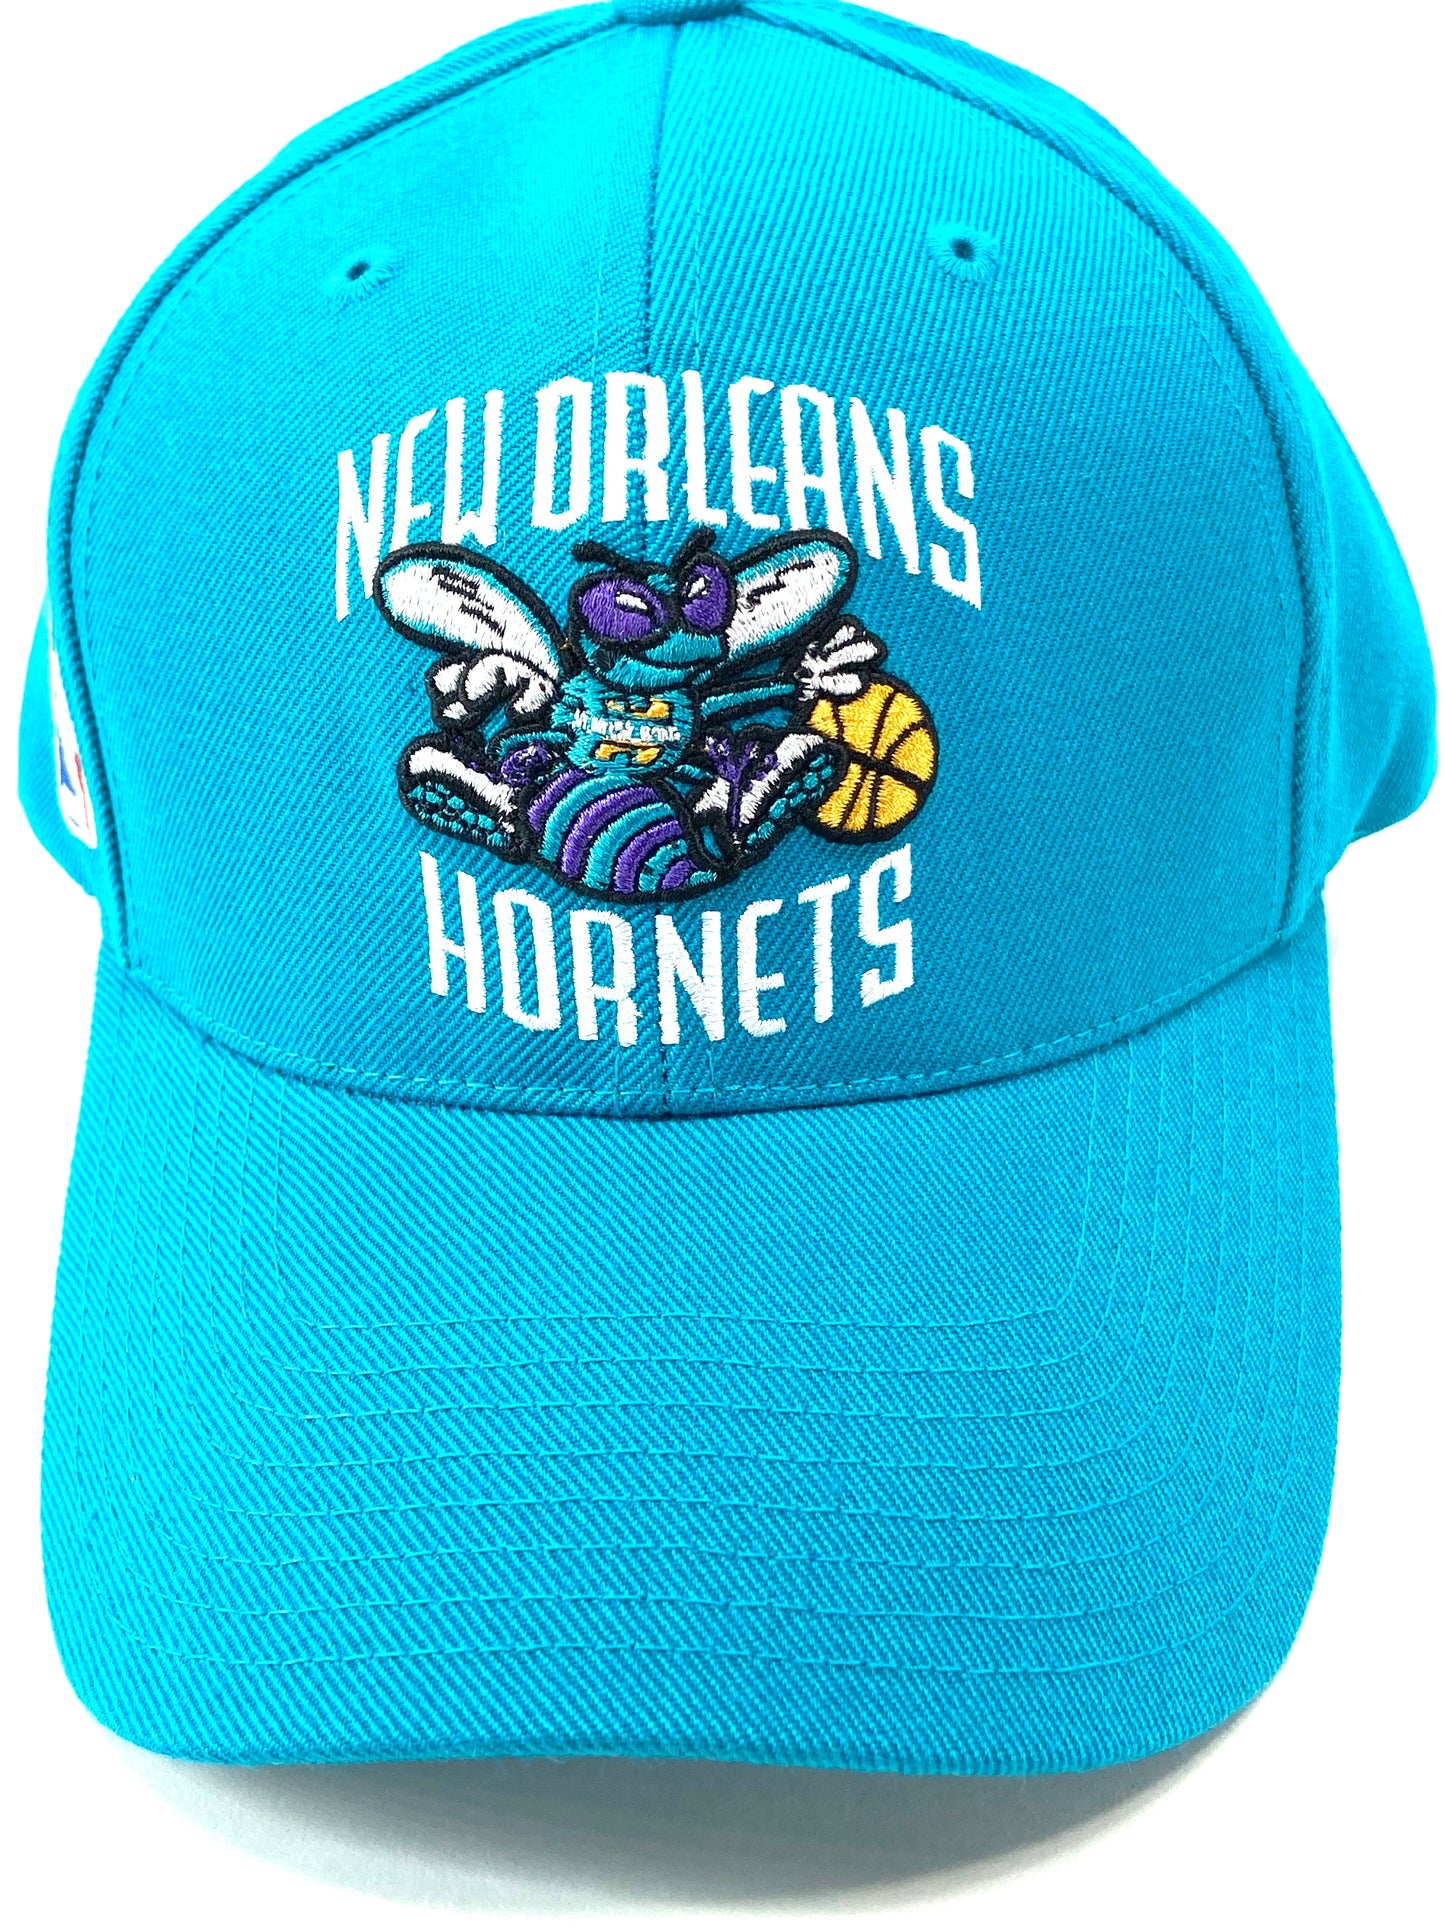 New Orleans Hornets 2007 NBA 20% Wool Turquoise Adjustable Cap